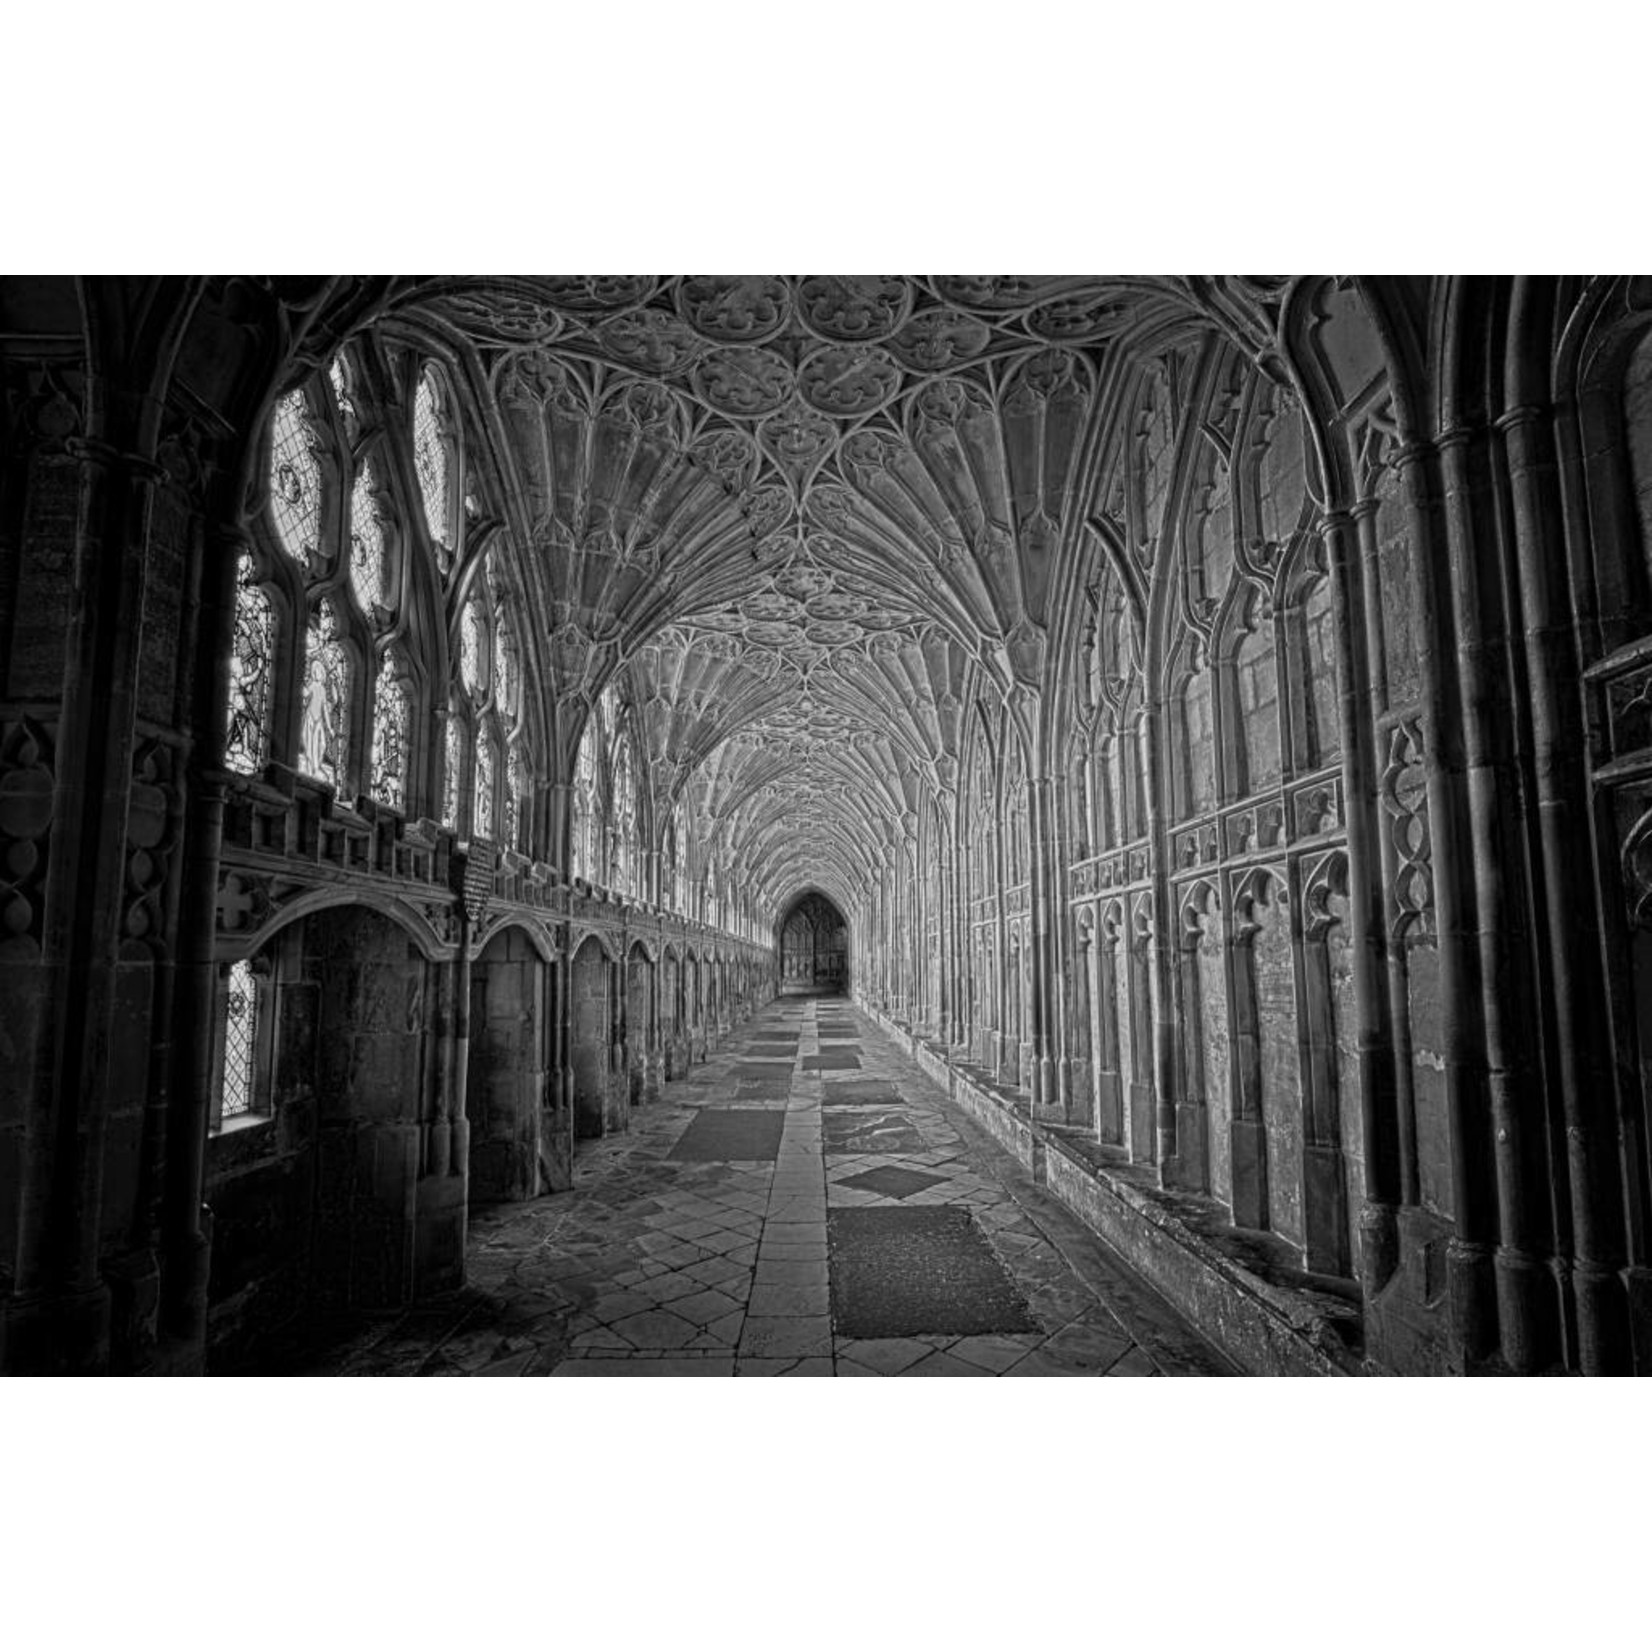 Fine Art Print on Rag Paper Gloucester Cathedral Black and White Photograph by M. Beck